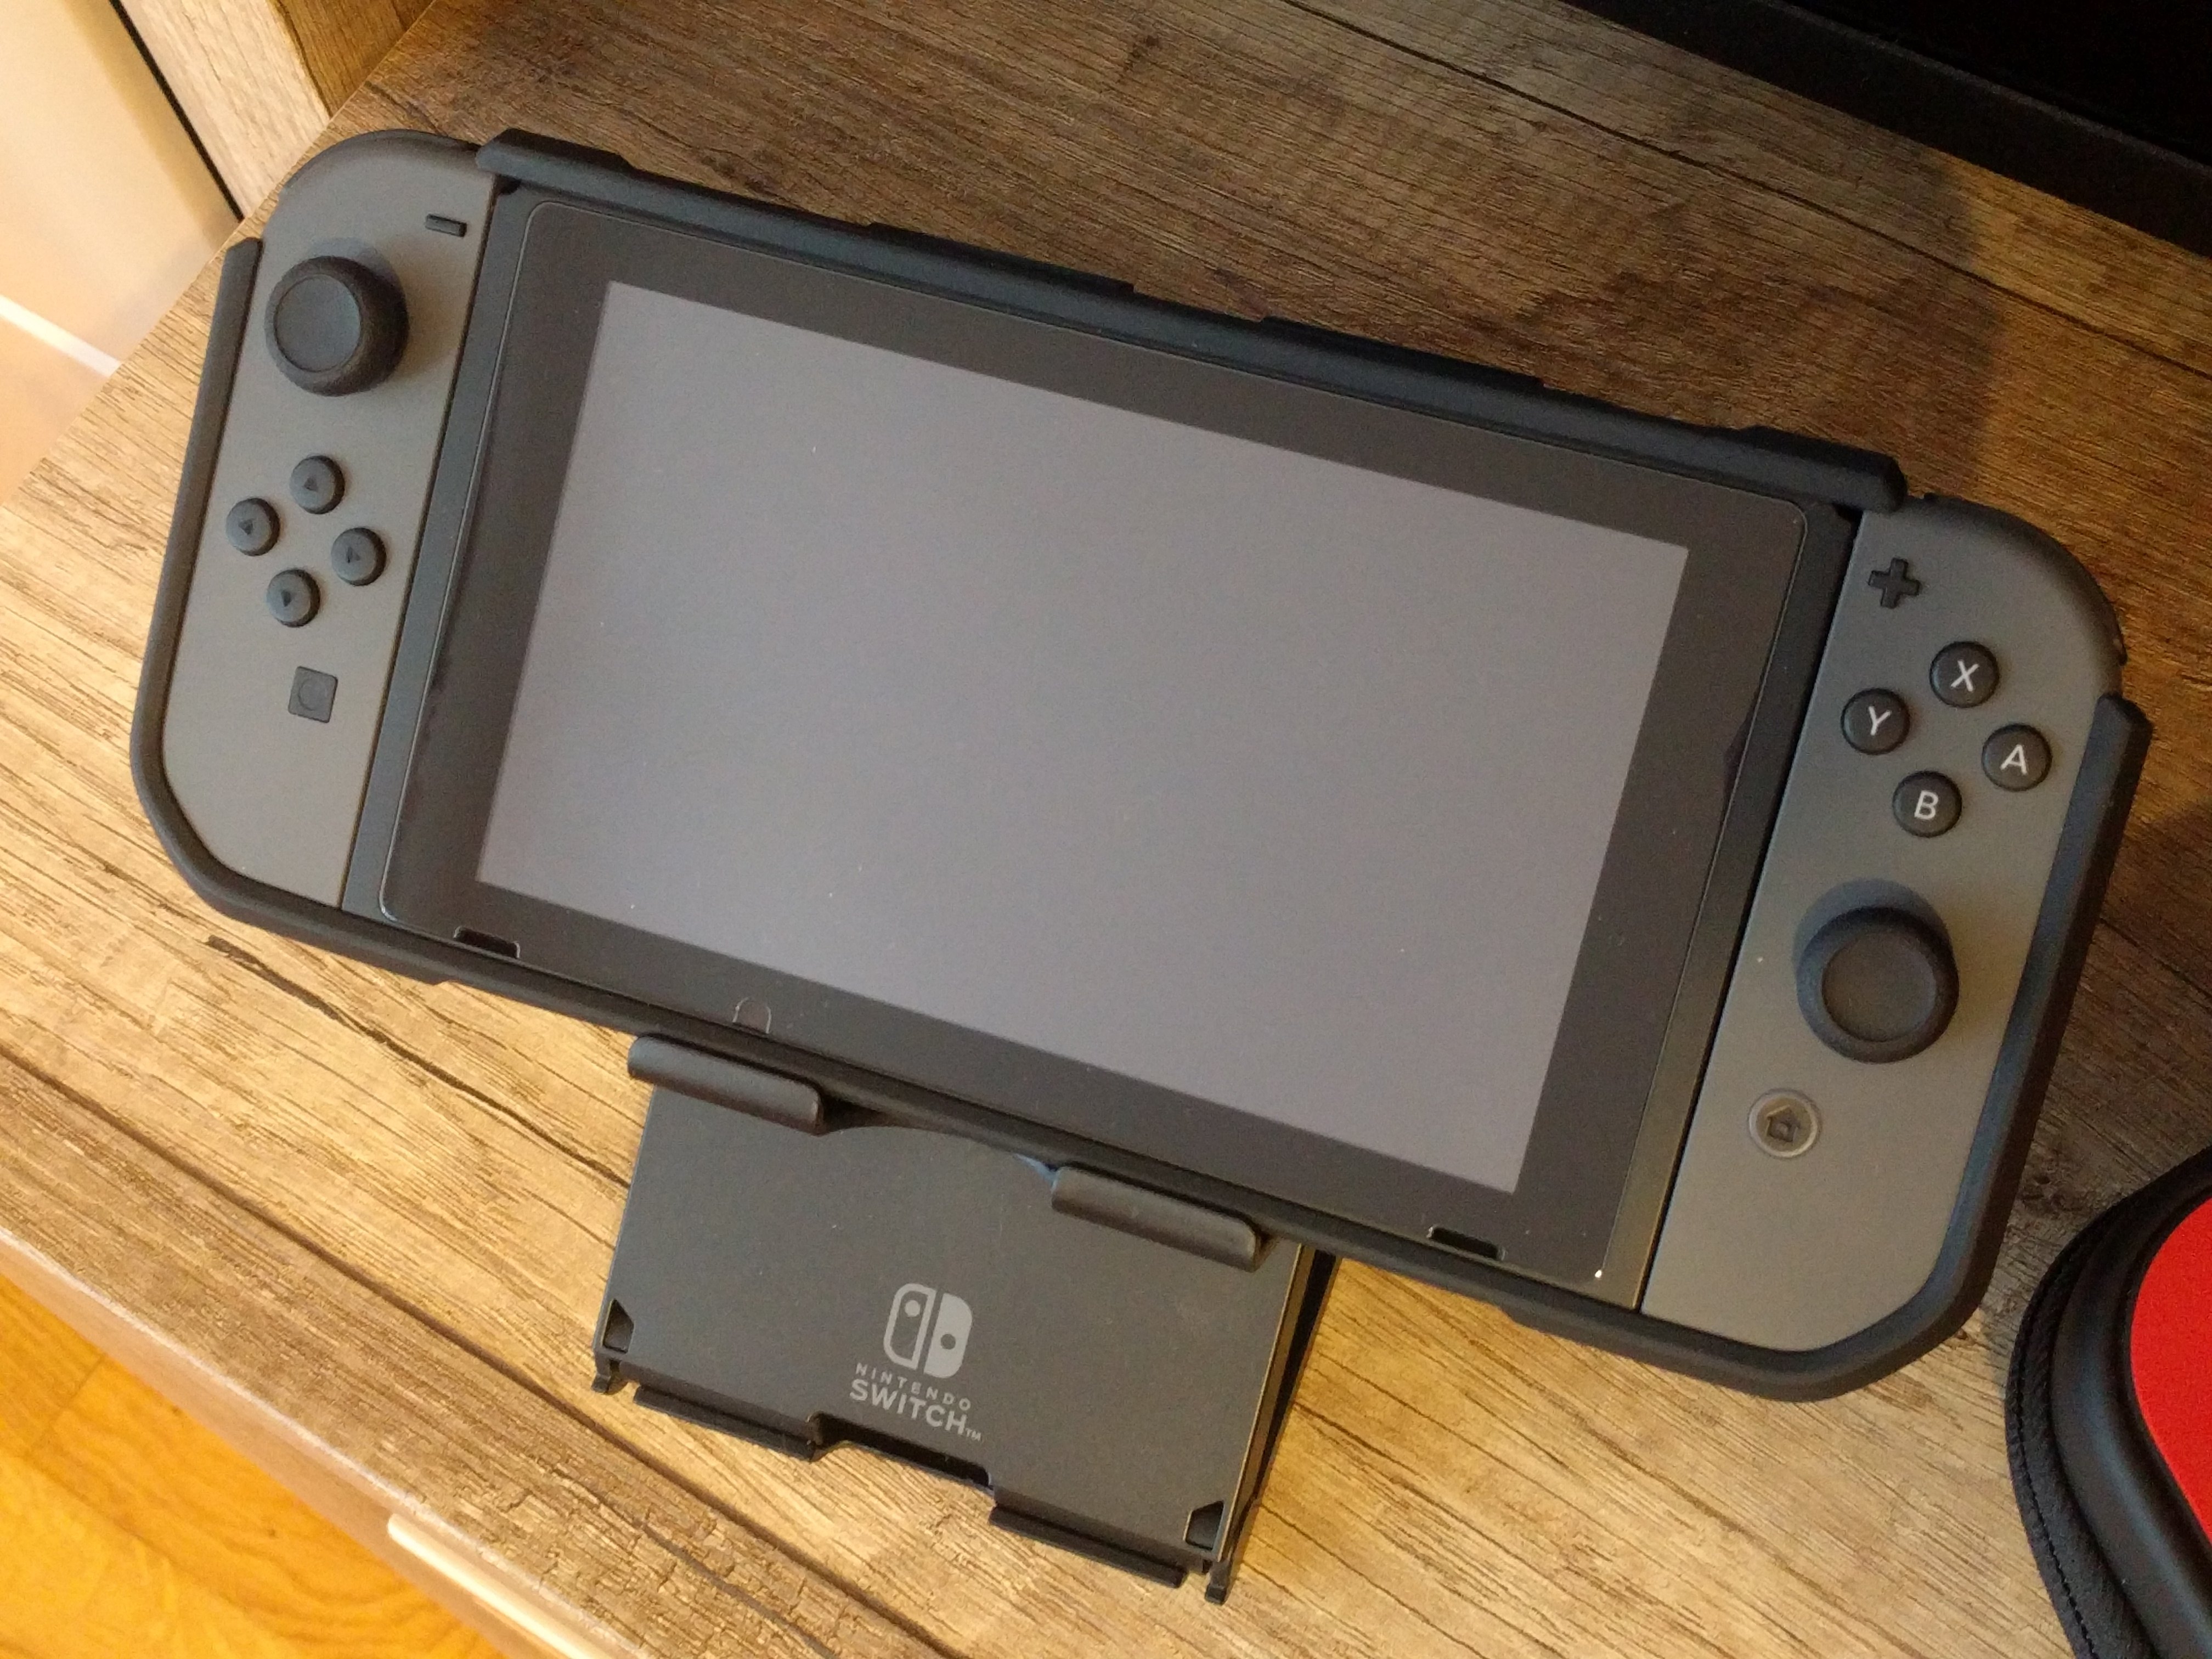 can't get rid of air bubbles on Nintendo switch screen protector | - Independent Video Game Community